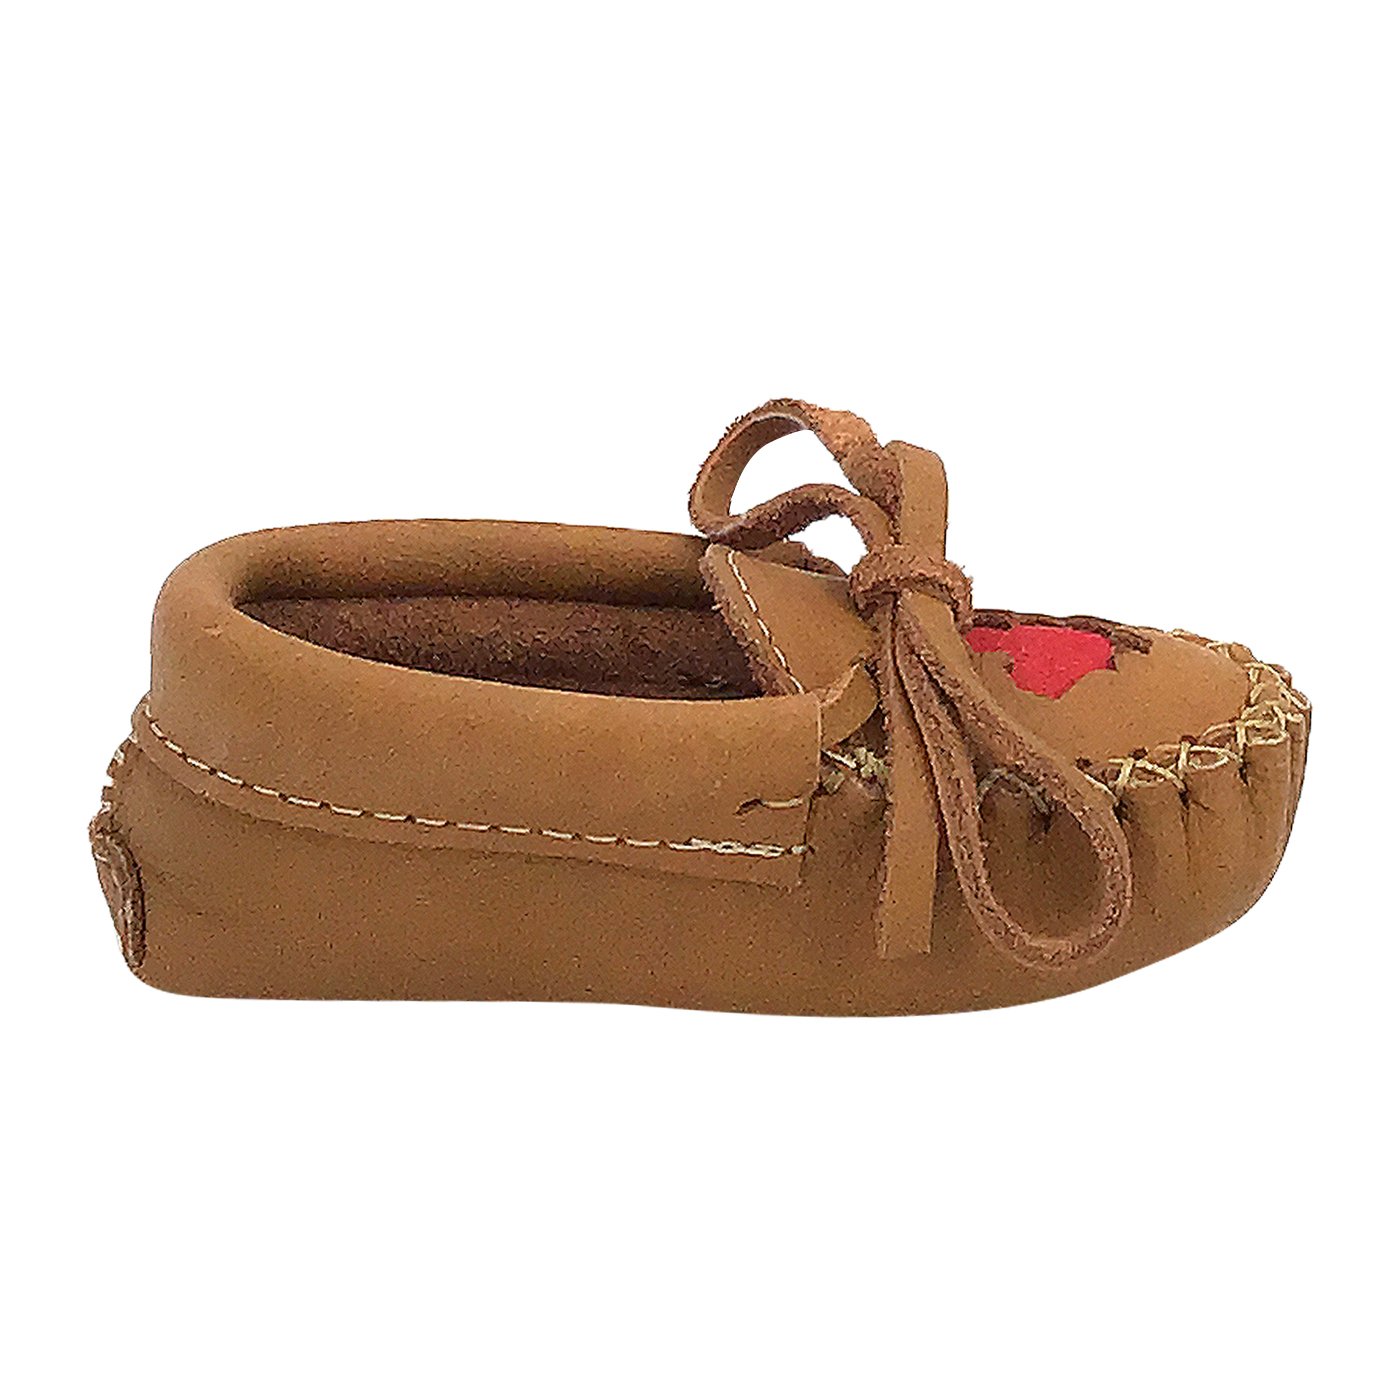 Children's Maple Leaf Moccasins (Final Clearance)